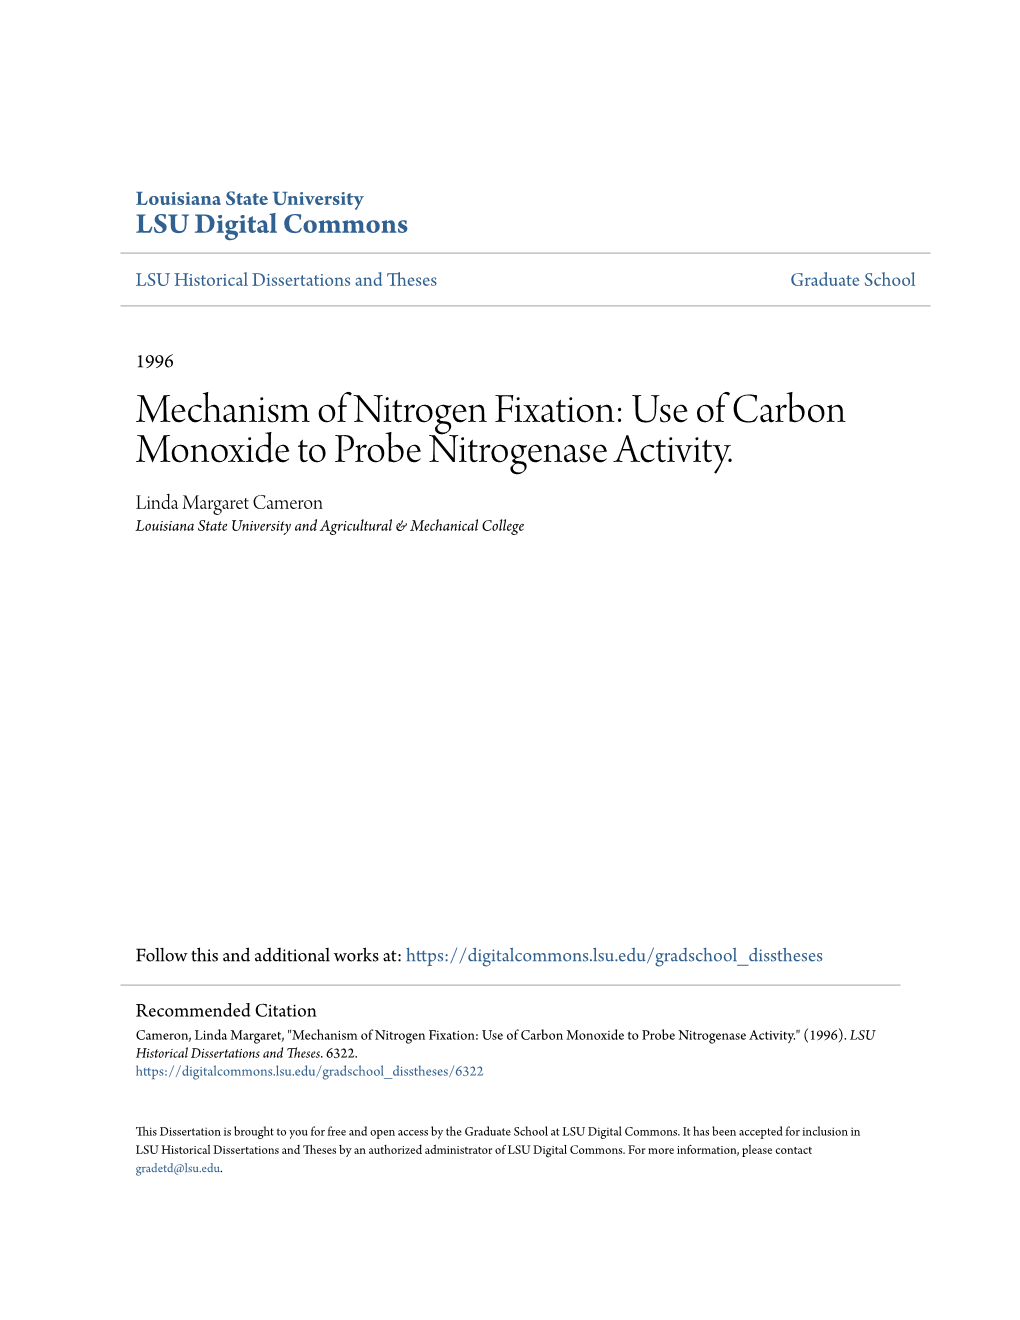 Use of Carbon Monoxide to Probe Nitrogenase Activity. Linda Margaret Cameron Louisiana State University and Agricultural & Mechanical College